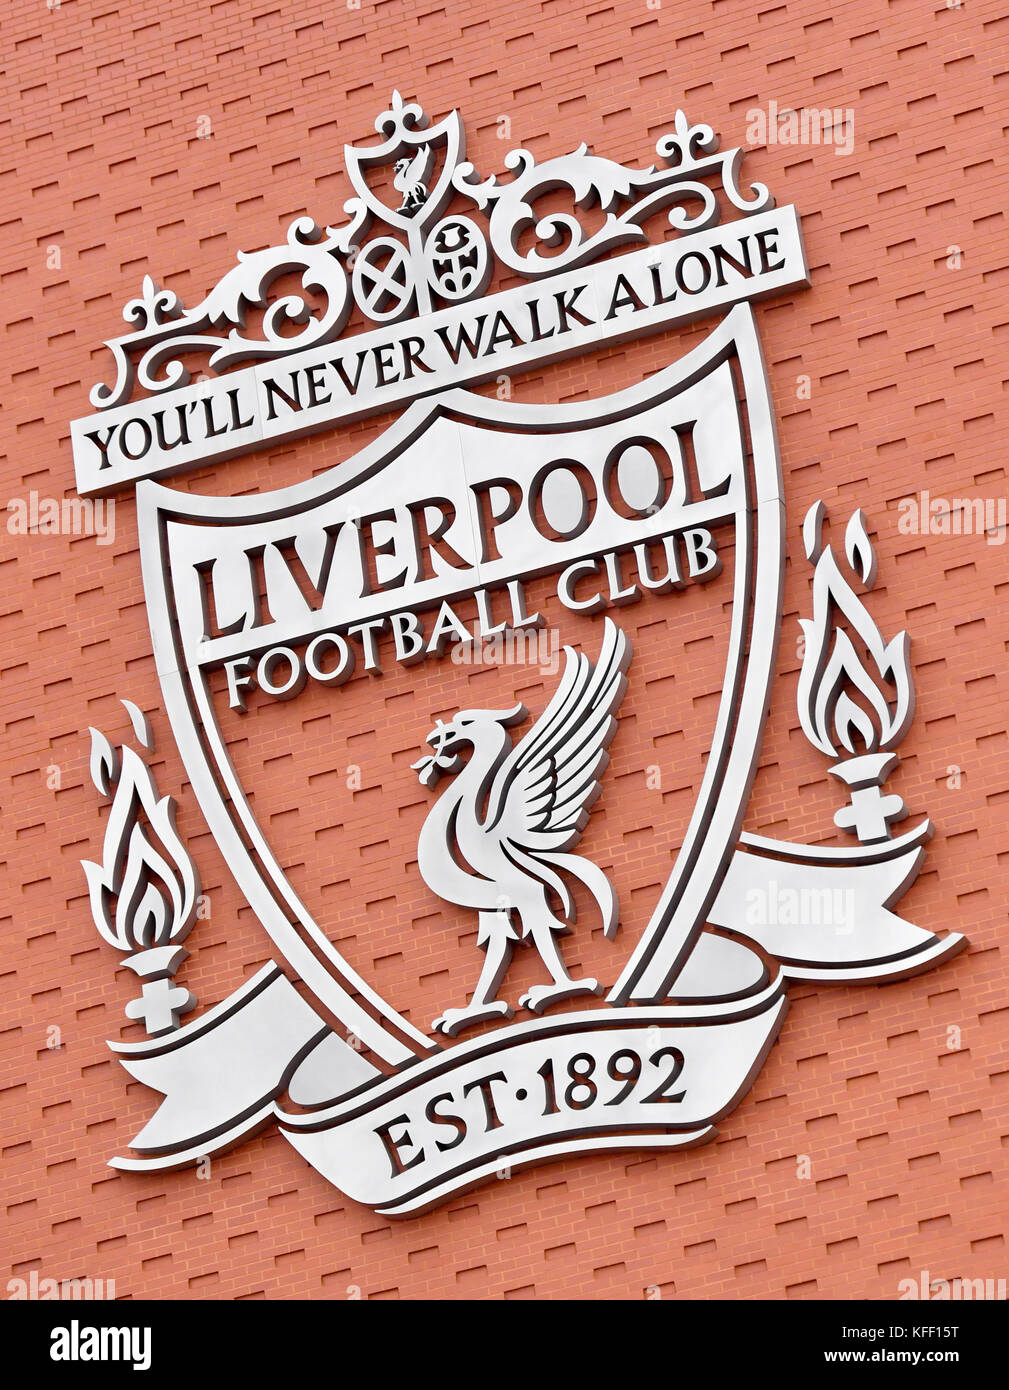 A general view of a Liverpool logo during the Premier League match at Anfield, Liverpool. Stock Photo